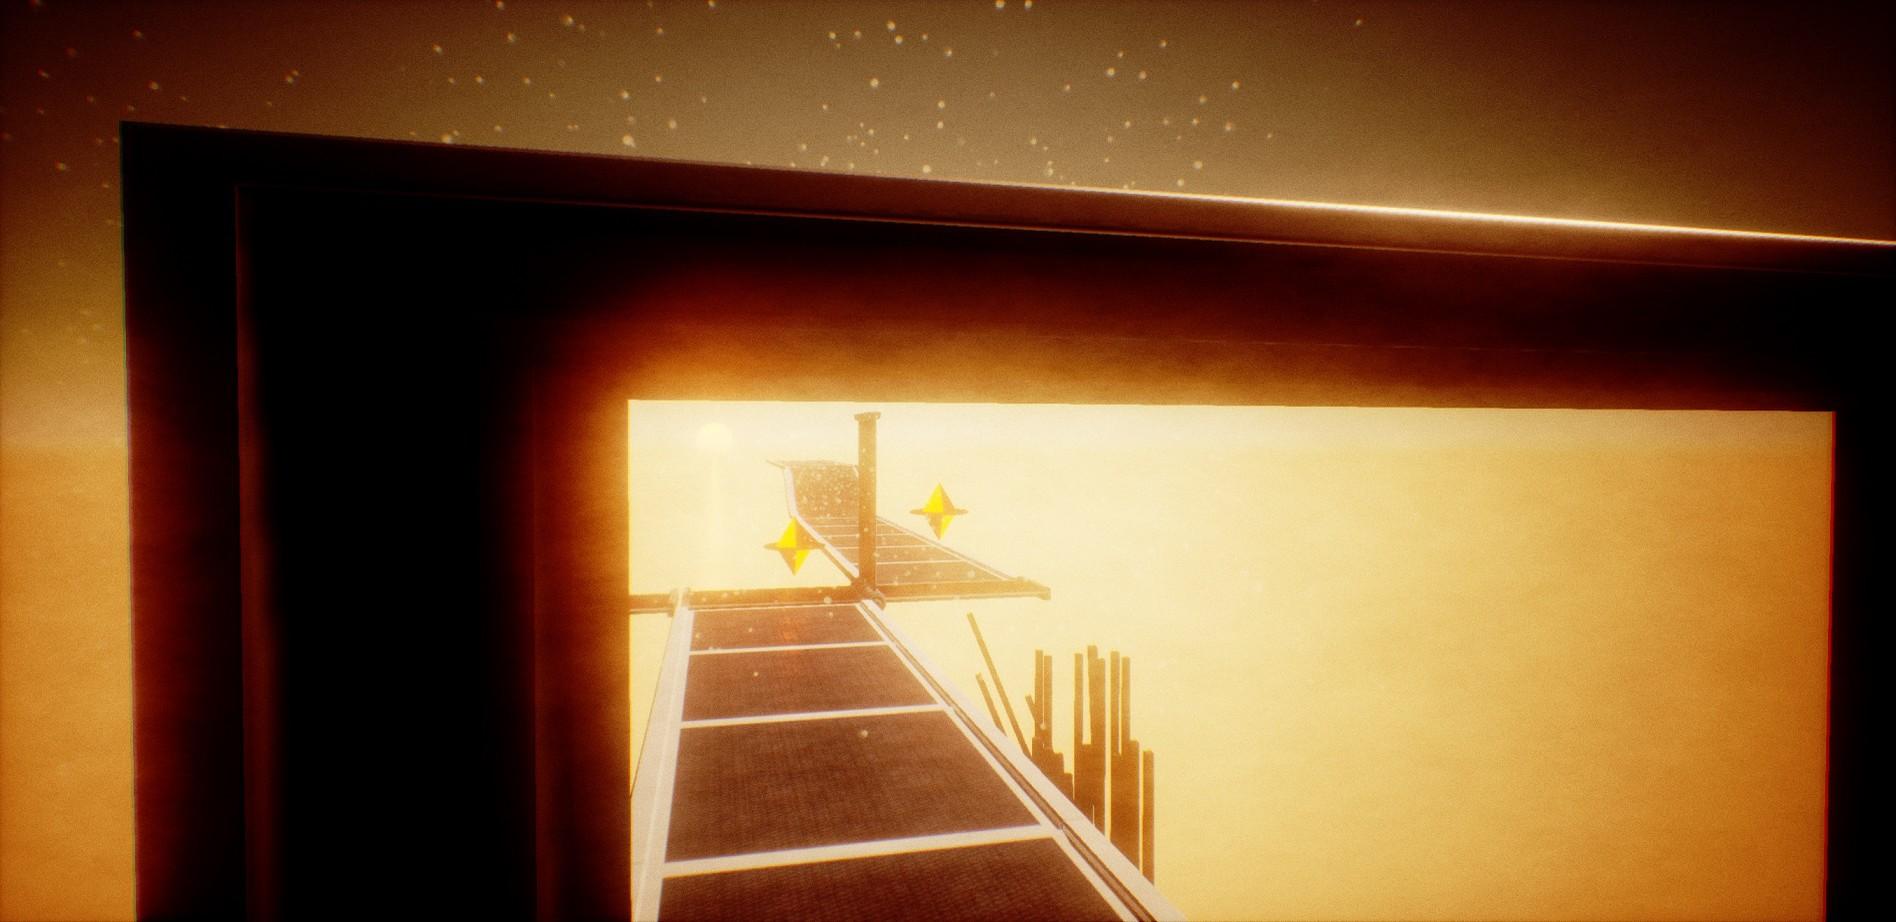 Screenshot №18 from game Hyposphere